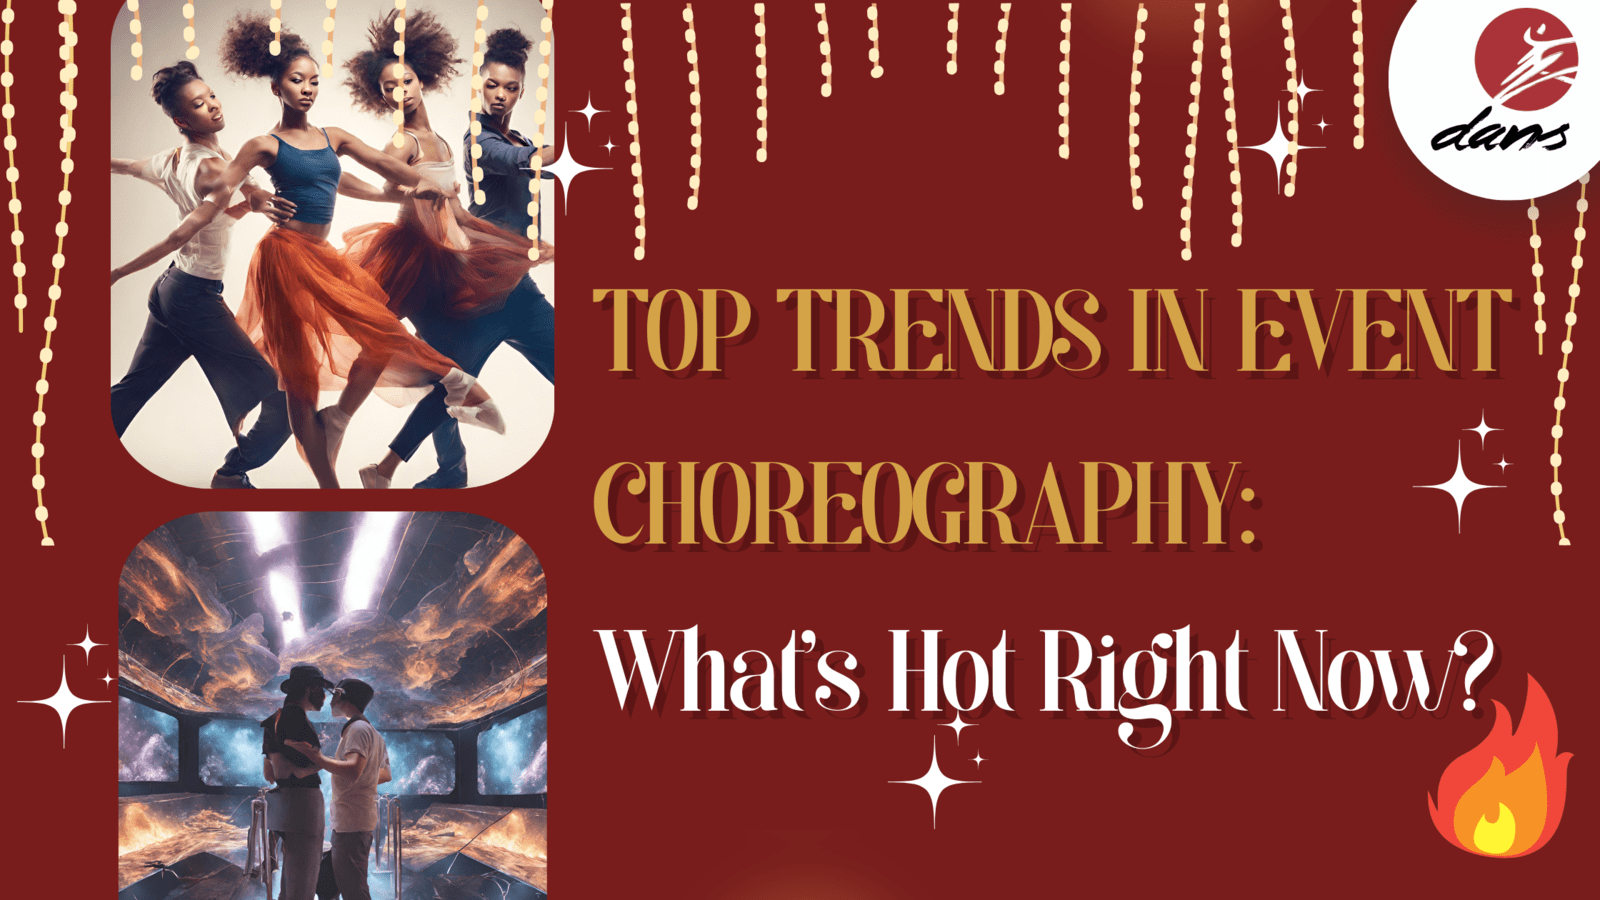 Top Trends In Event Choreography: What's Hot Right Now?